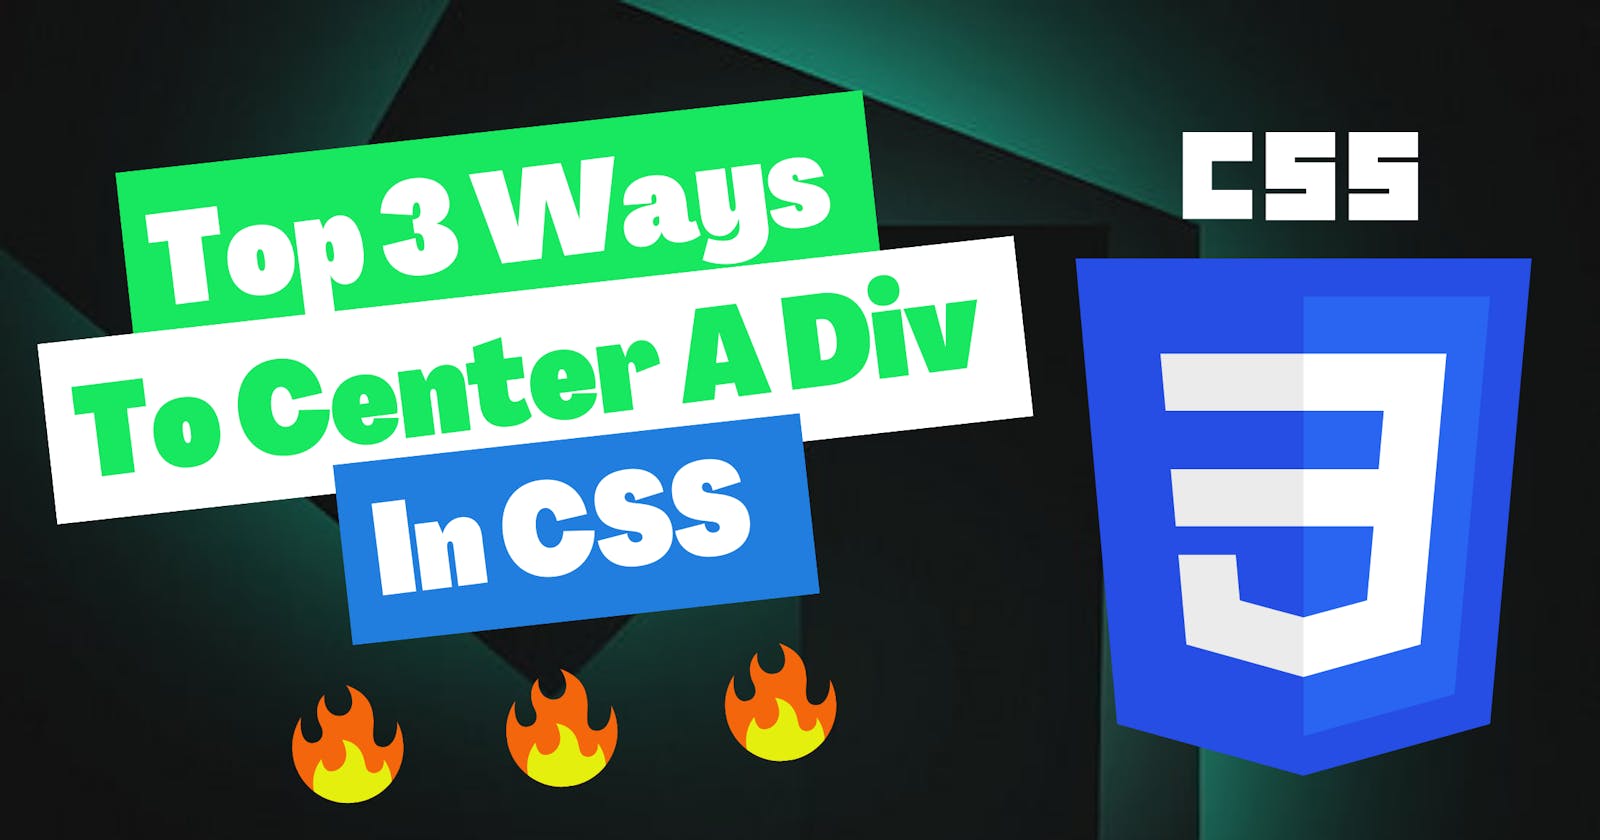 The top 3 ways to center a div using CSS you must know!